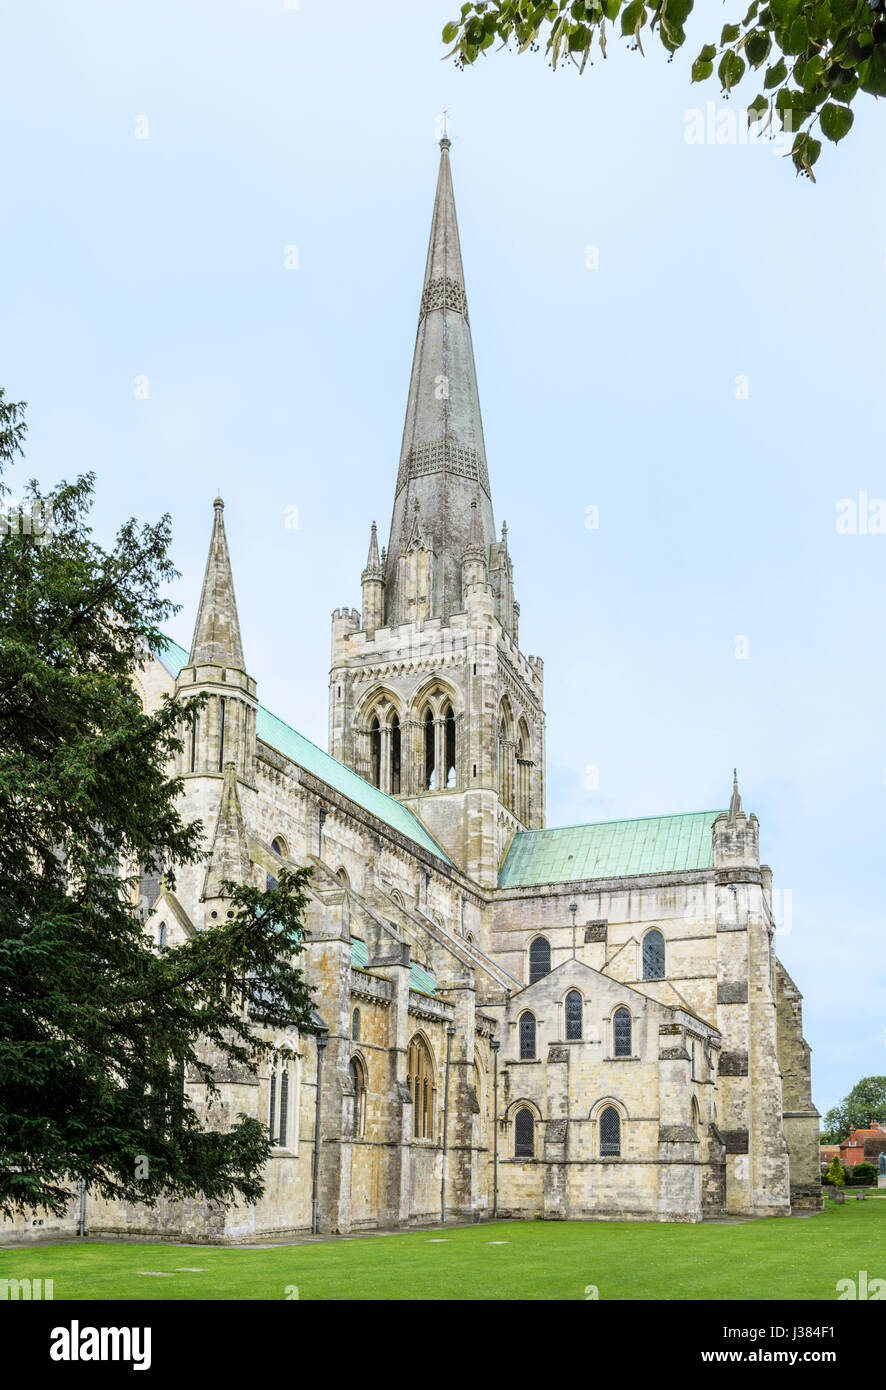 Chichester Kathedrale in Chichester, West Sussex, England, UK. Stockfoto